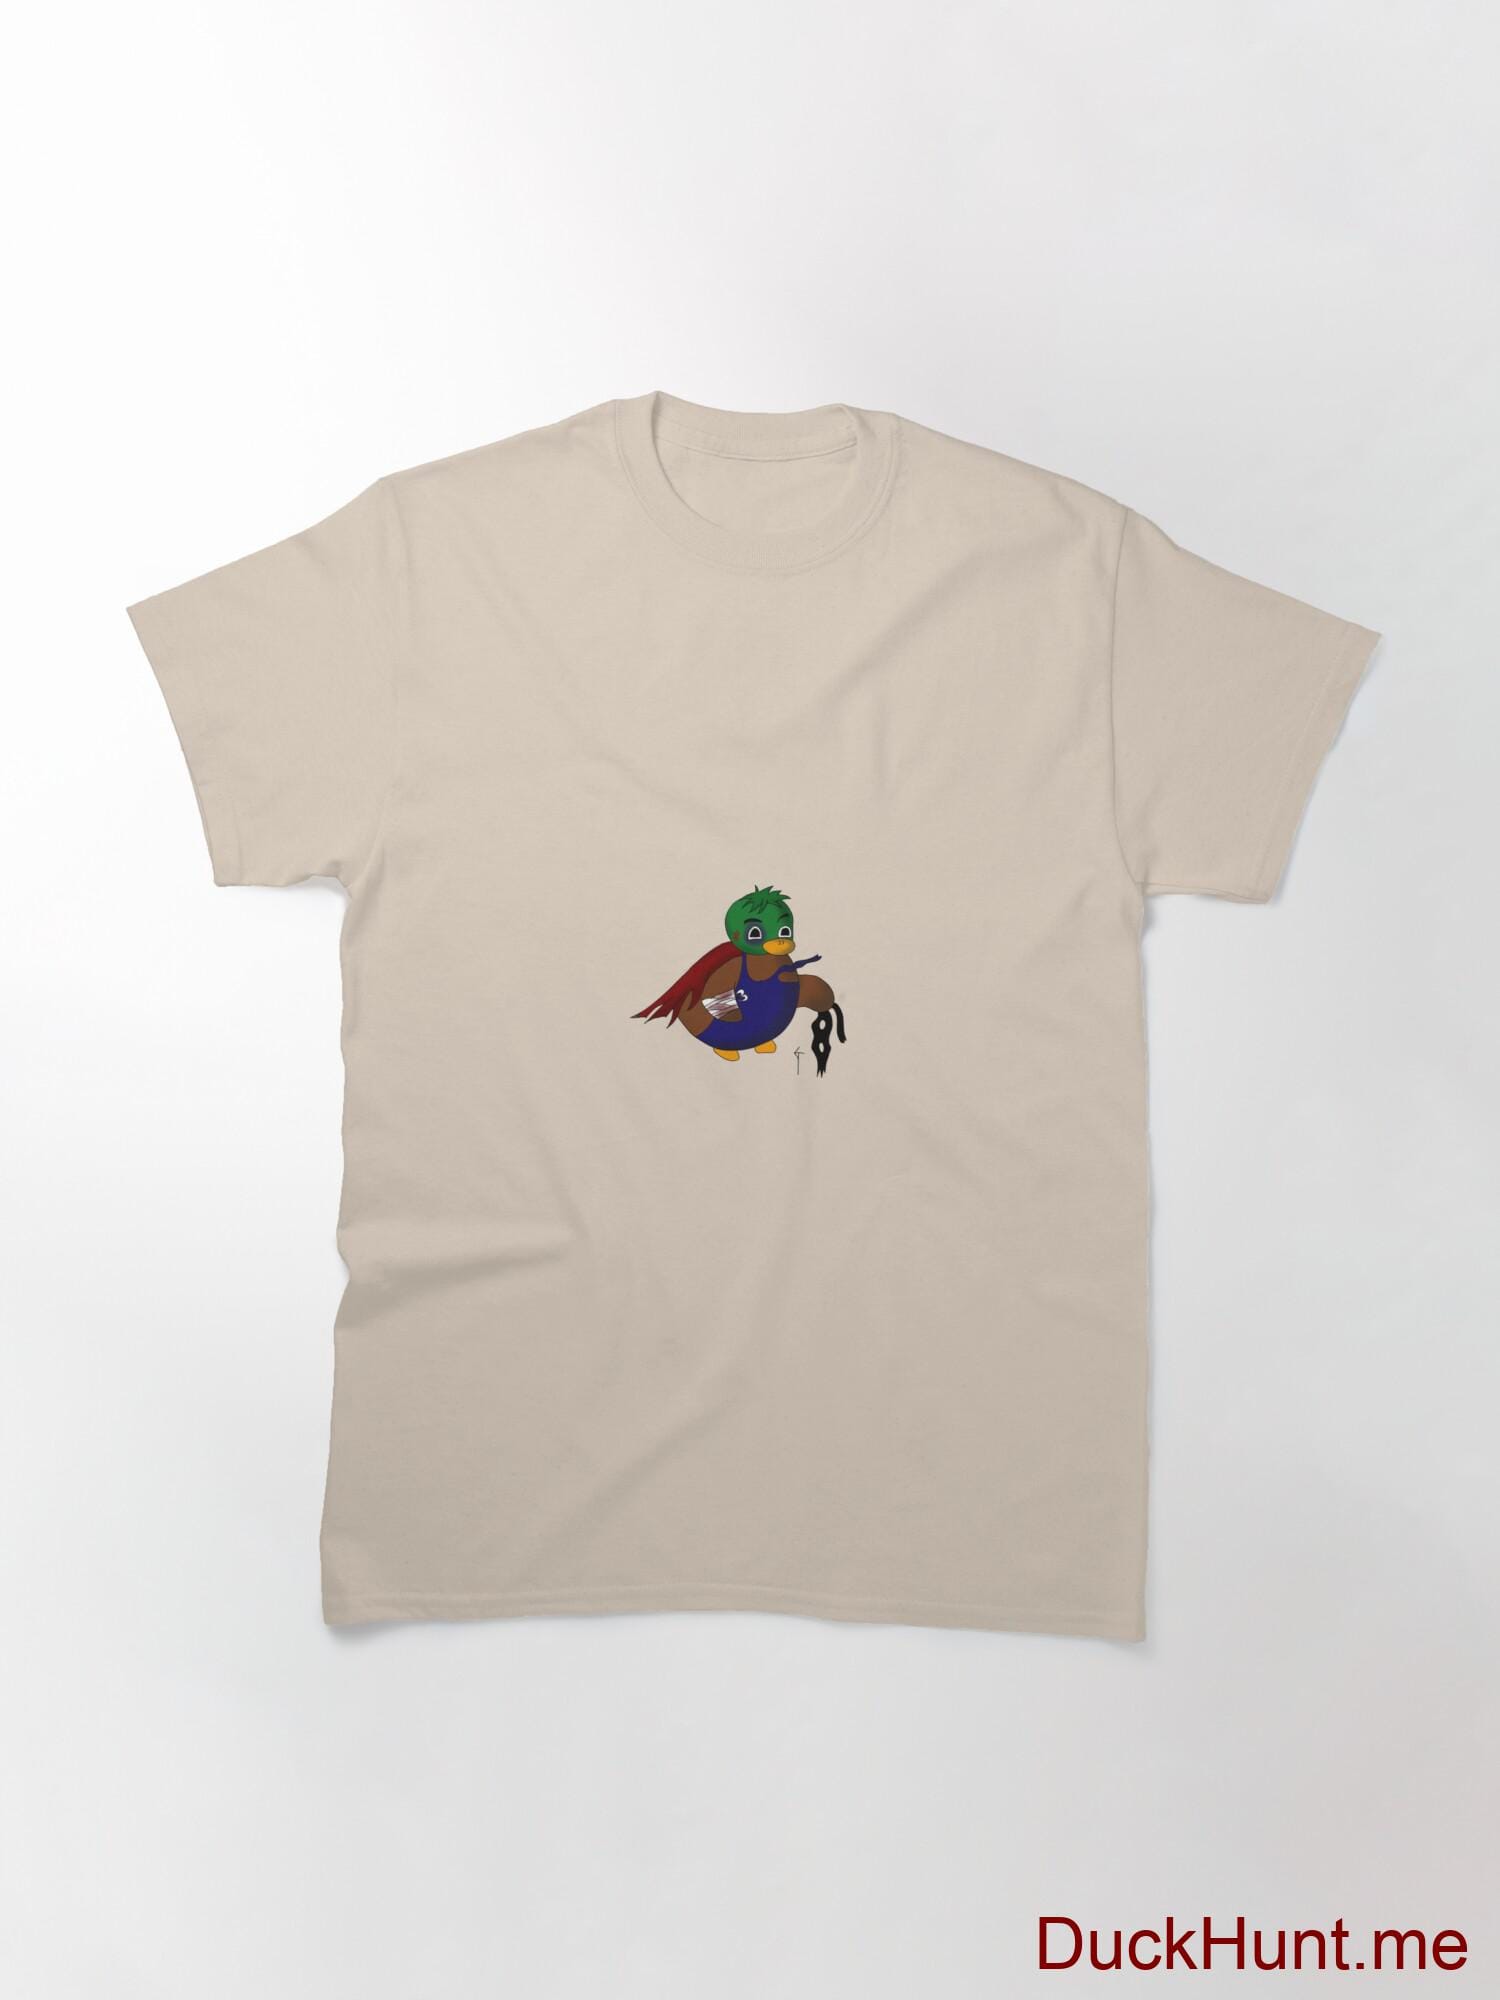 Dead DuckHunt Boss (smokeless) Creme Classic T-Shirt (Front printed) alternative image 2